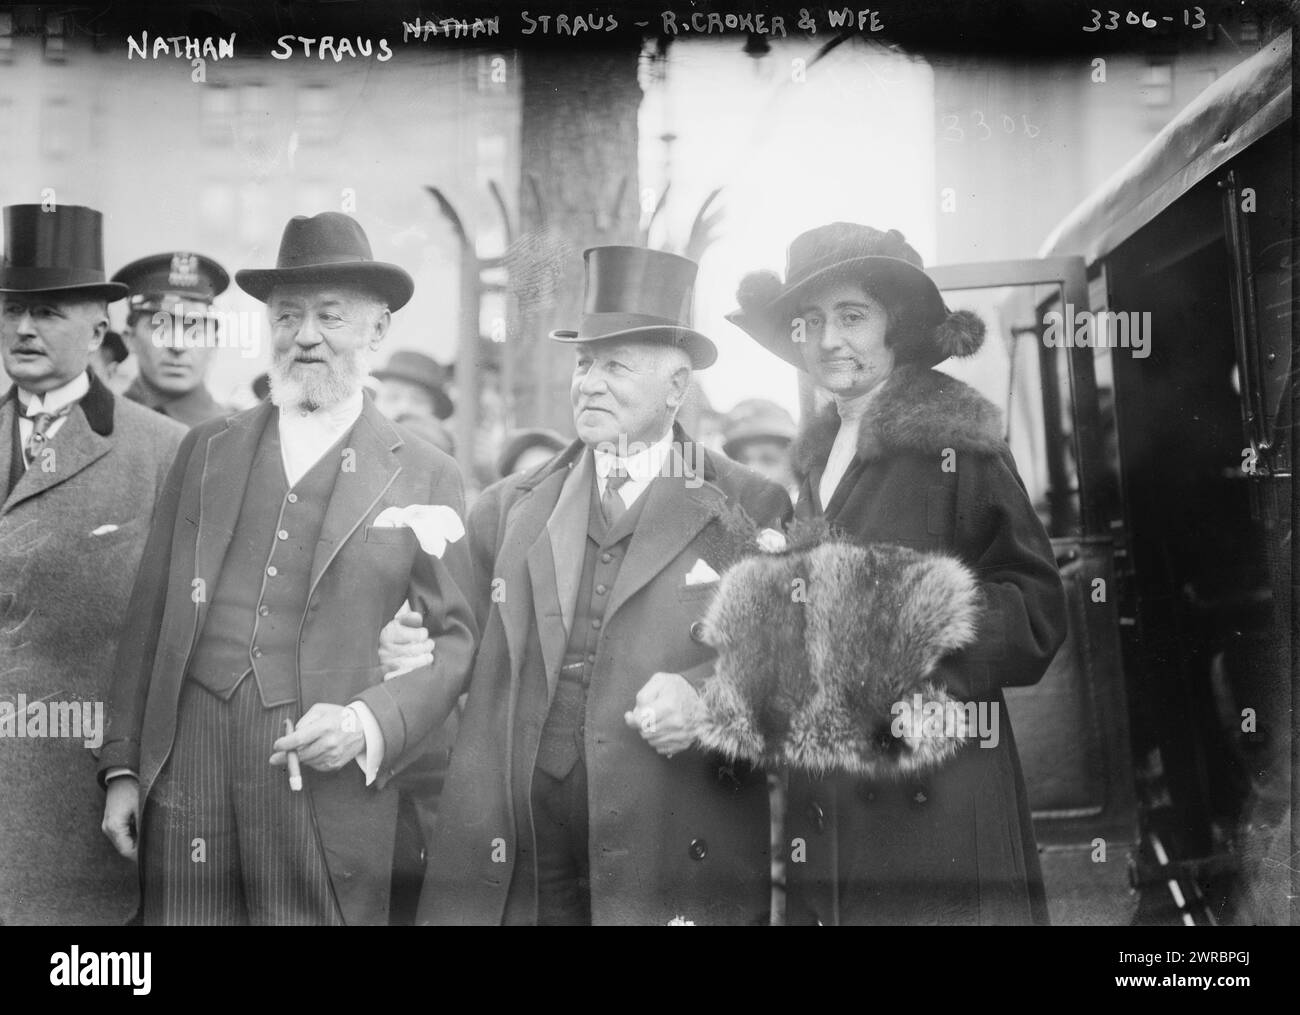 Nathan Straus and R. Croker & wife, Photograph shows Nathan Straus (1848-1931), American philanthropist and co-owner of the New York department stores R.H. Macy and Abraham Straus, with Richard Eyre Croker (1843-1922), a Tammany Hall boss., between ca. 1910 and ca. 1915, Glass negatives, 1 negative: glass Stock Photo